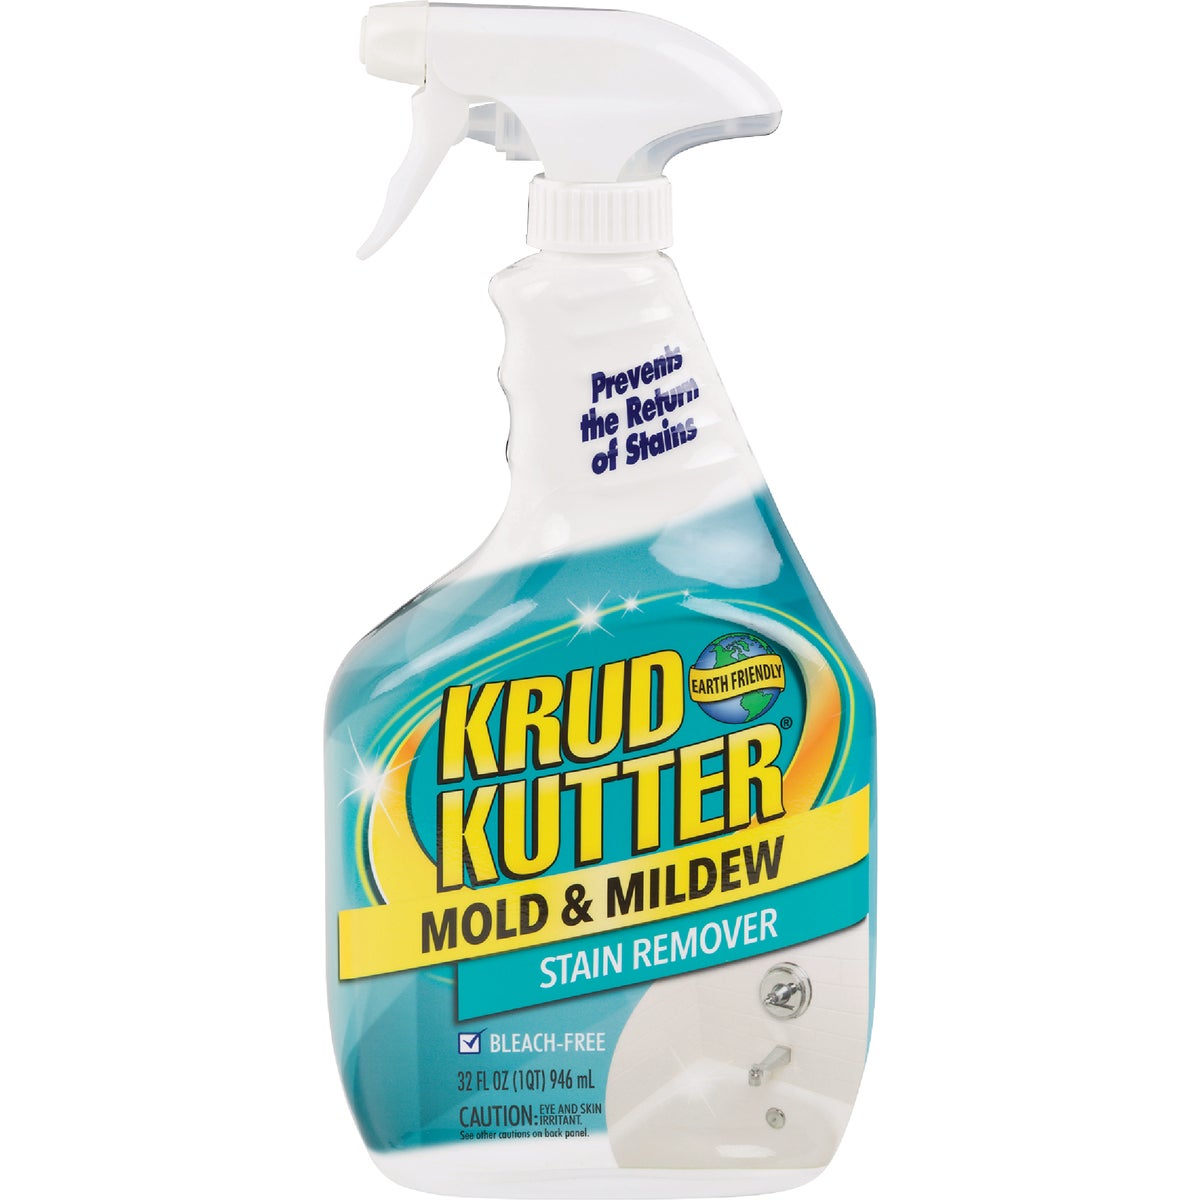 Krud Kutter 32 Oz. Mold and Mildew Stain Remover